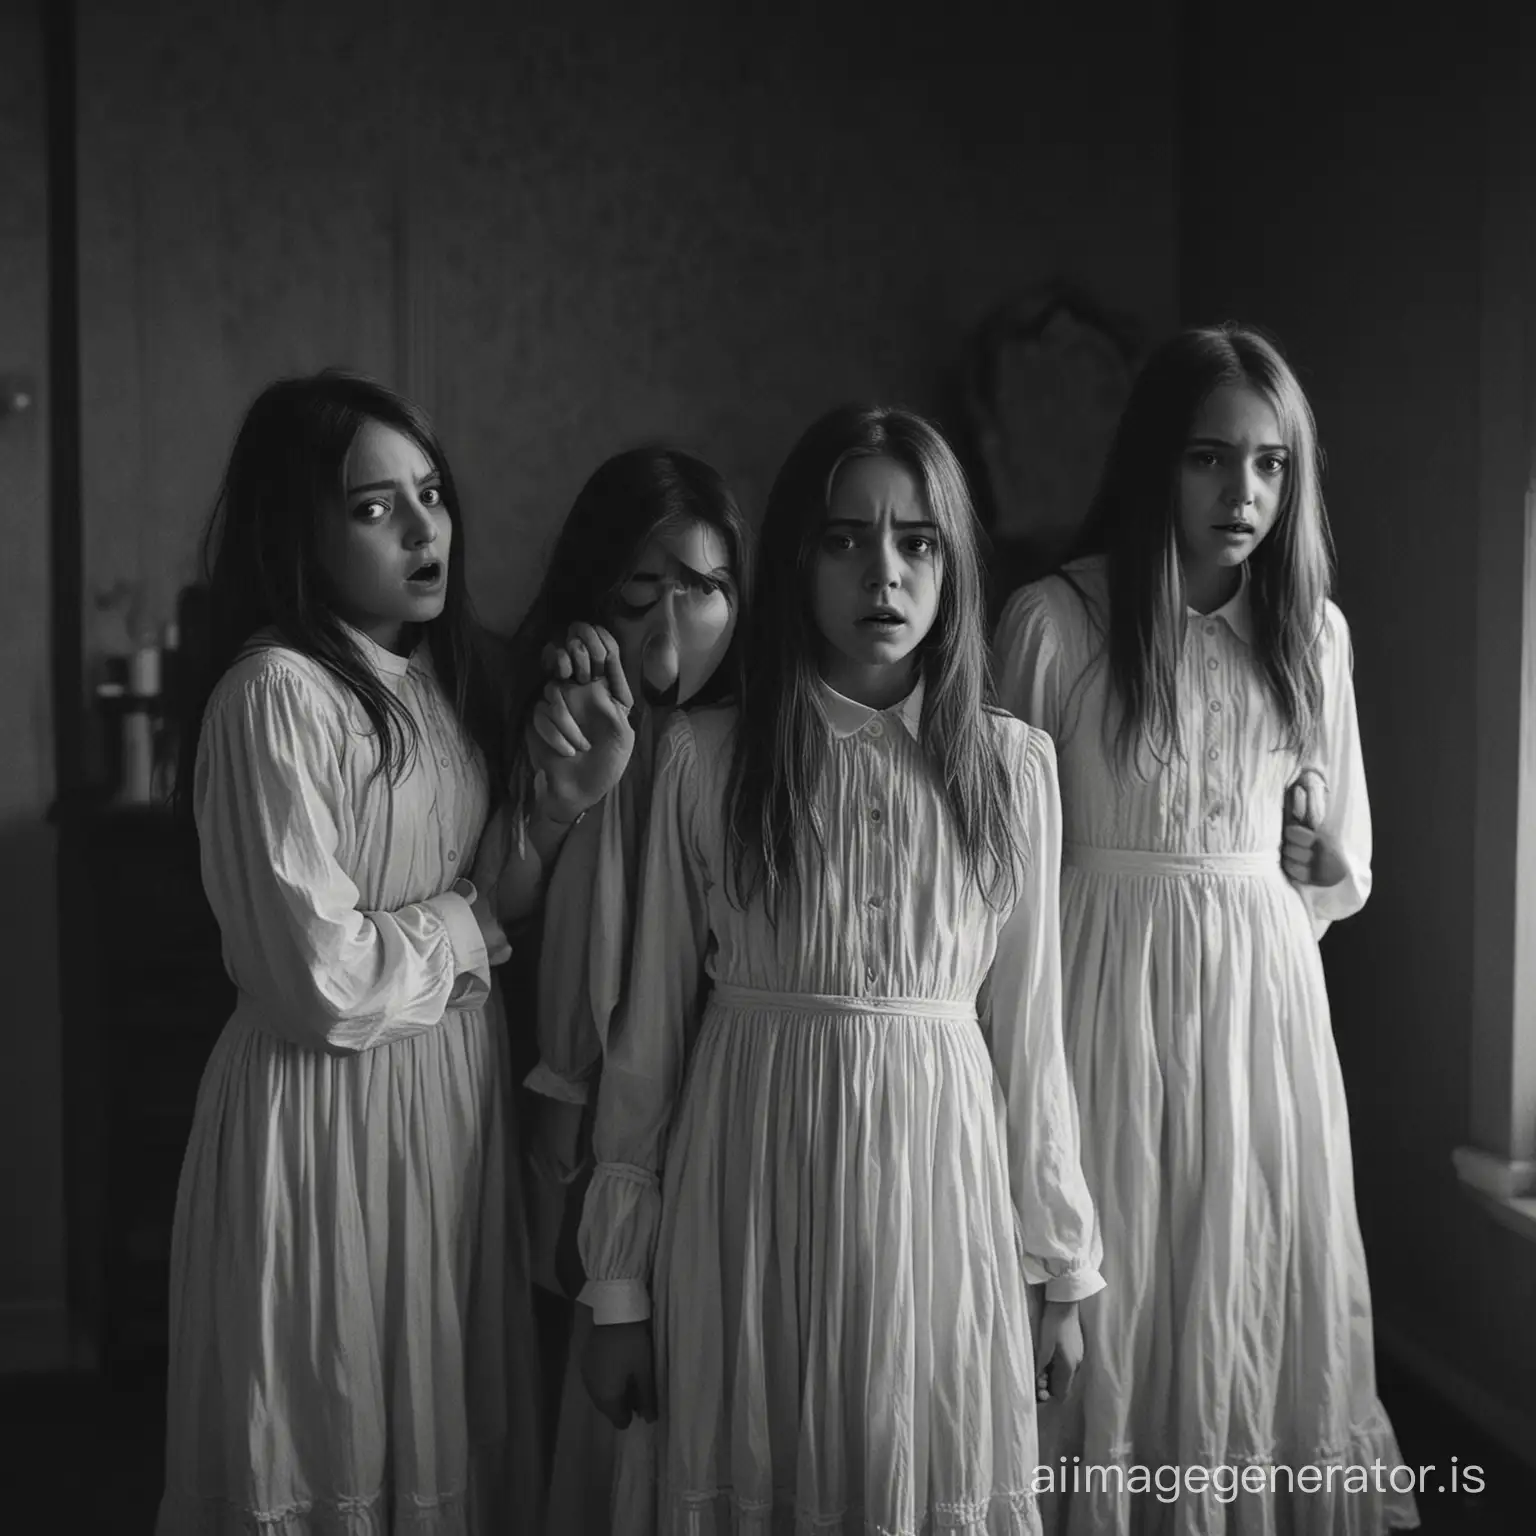 Anxious-Young-Girls-in-Haunted-Room